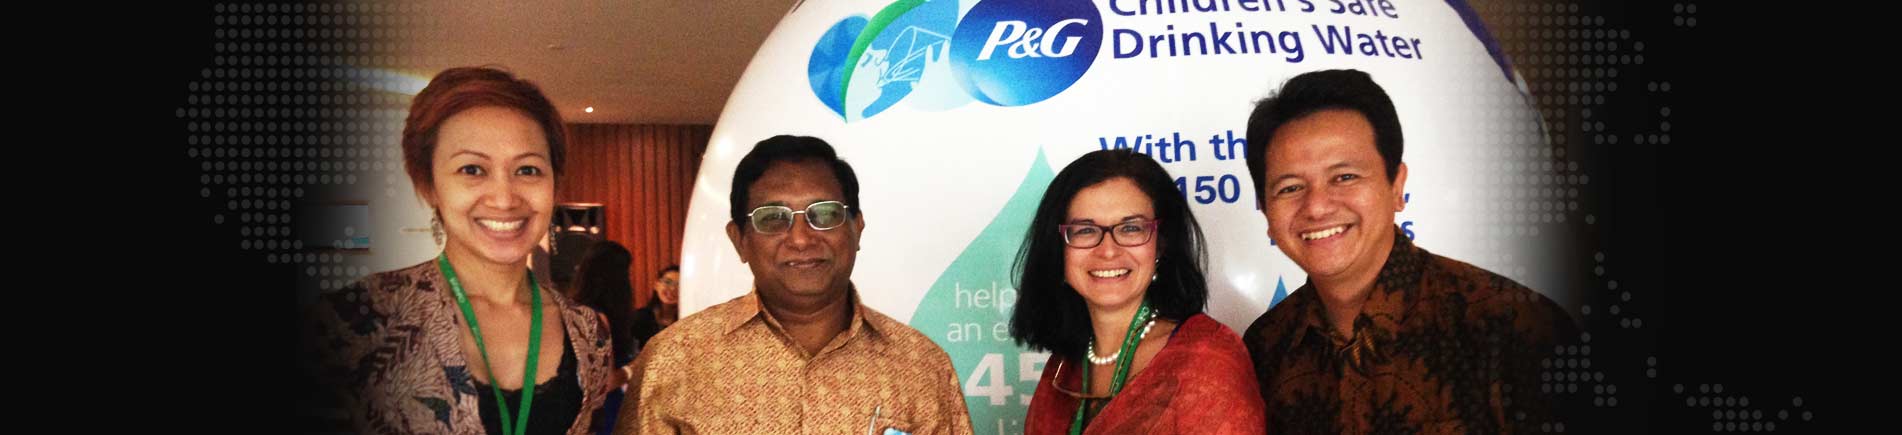 Smiling adults in front of a P&G display